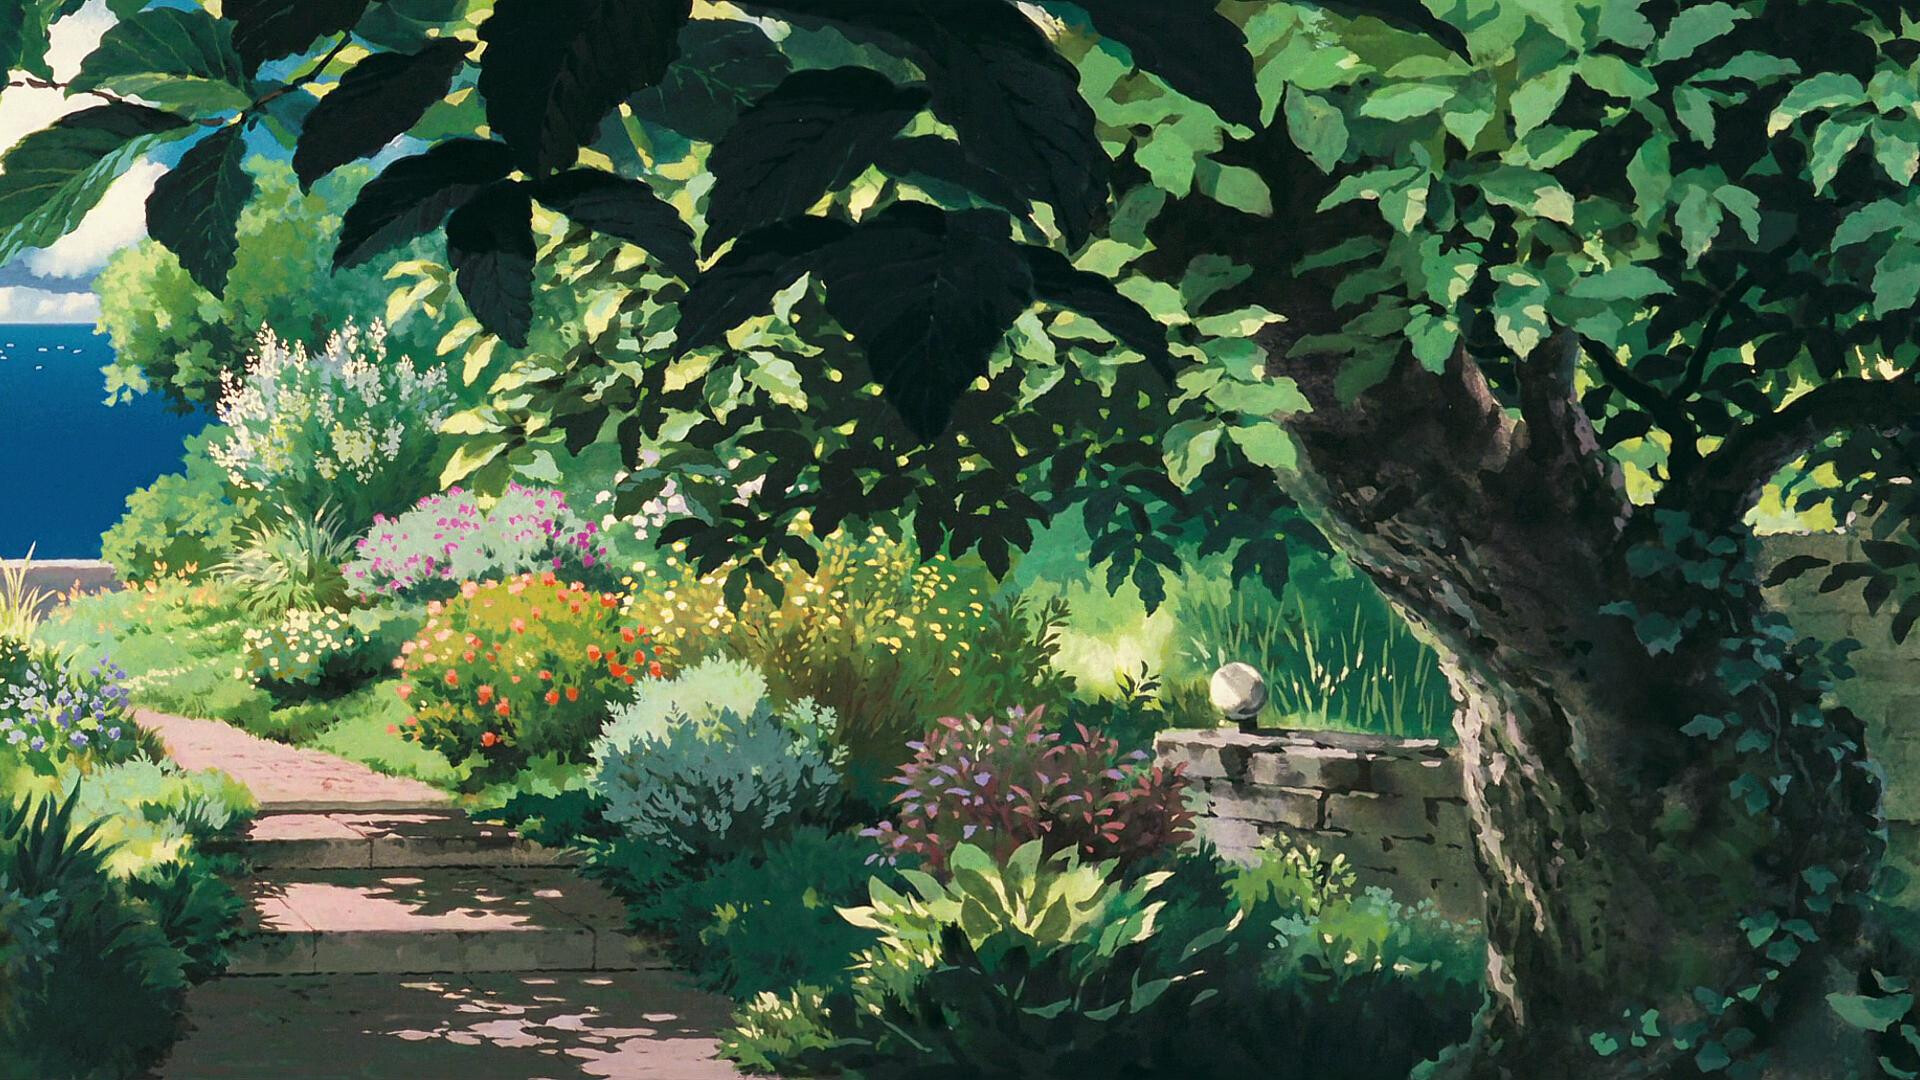 Studio Ghibli: The films are featuring themes and messages that are relevant to viewers of all ages. 1920x1080 Full HD Wallpaper.